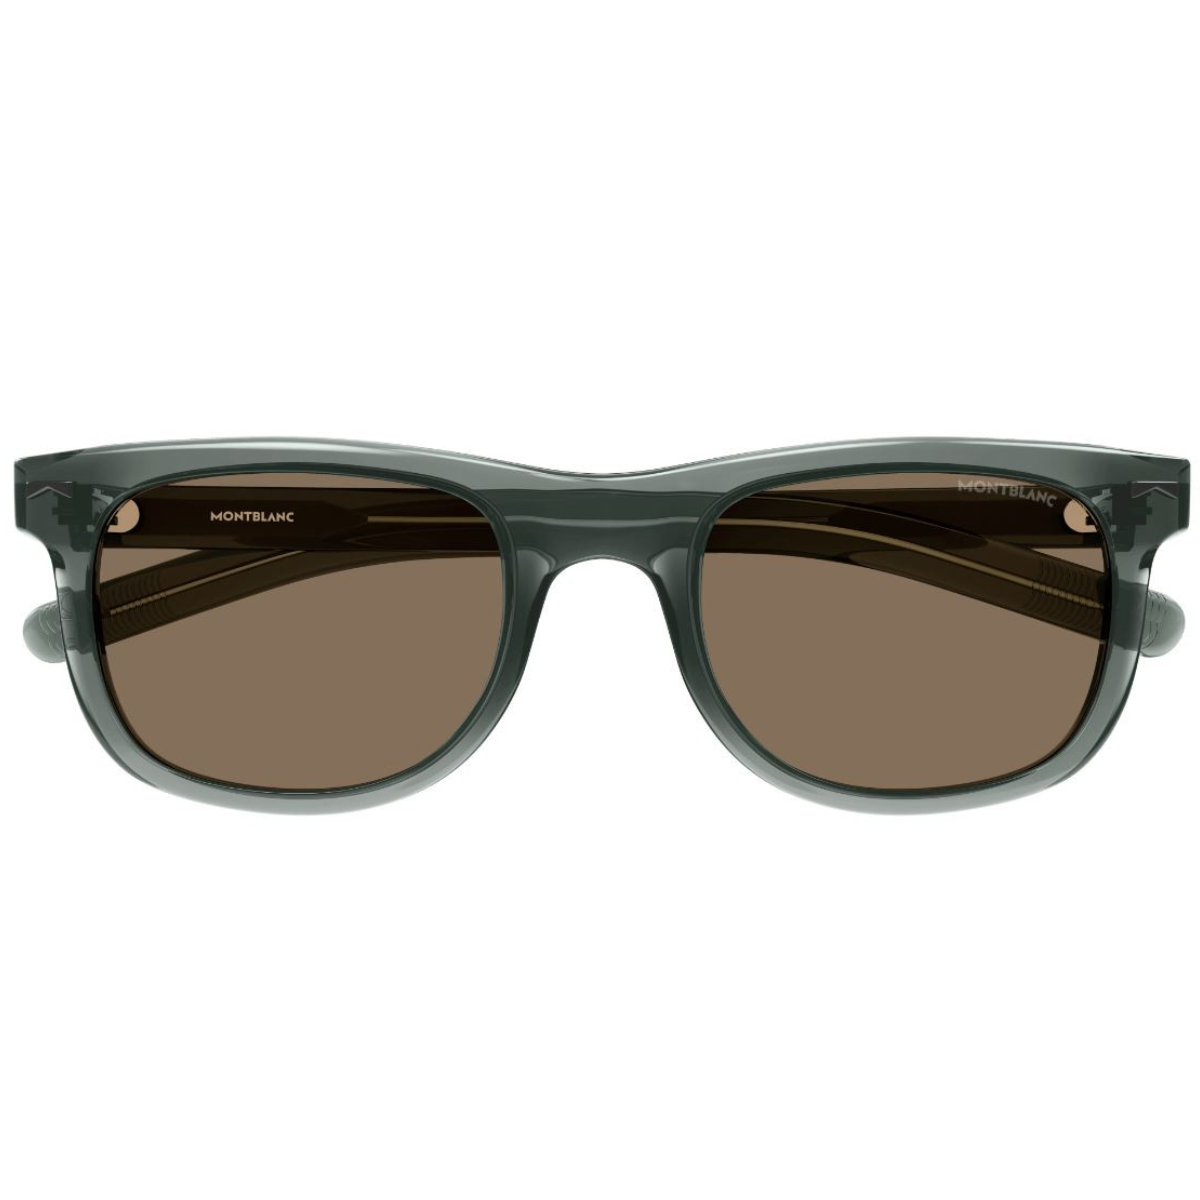 ""Mont Blanc MB0260S: Stylish Square Sunglasses for Men | Optorium - Polarized and non-polarized lens options available in various colors. Elevate your look with the best cooling glasses for men.""